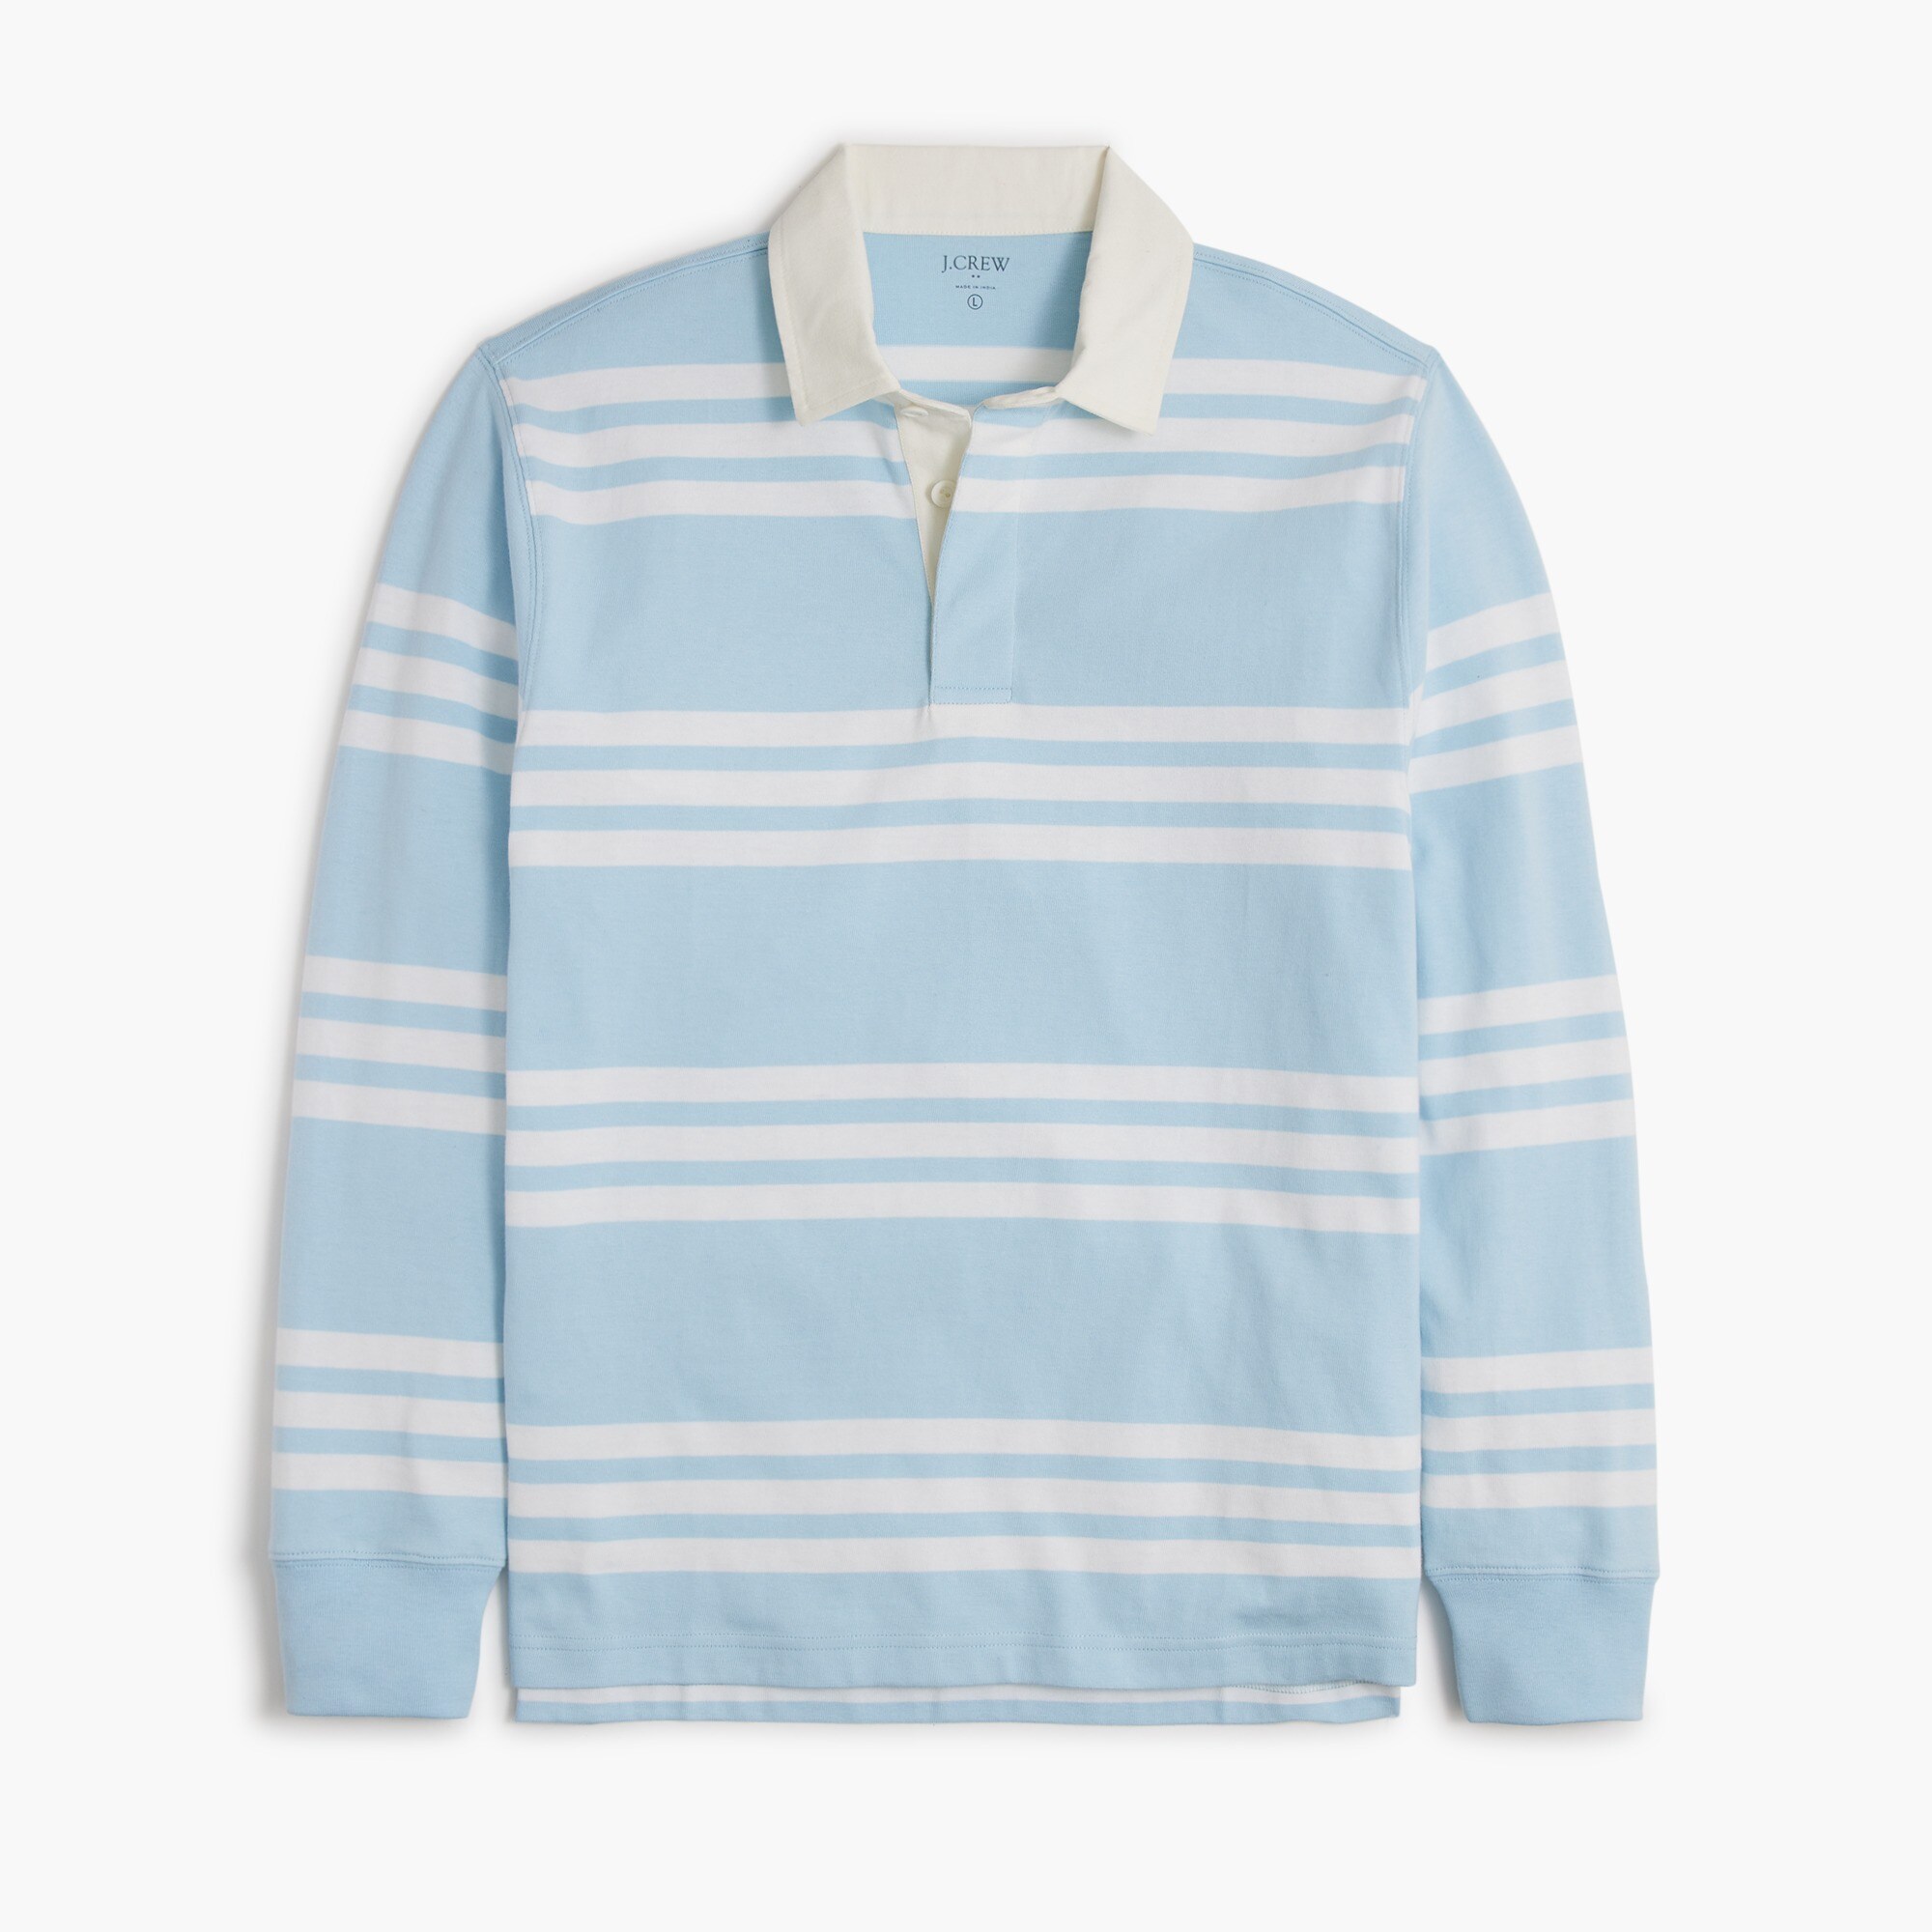  Striped rugby shirt